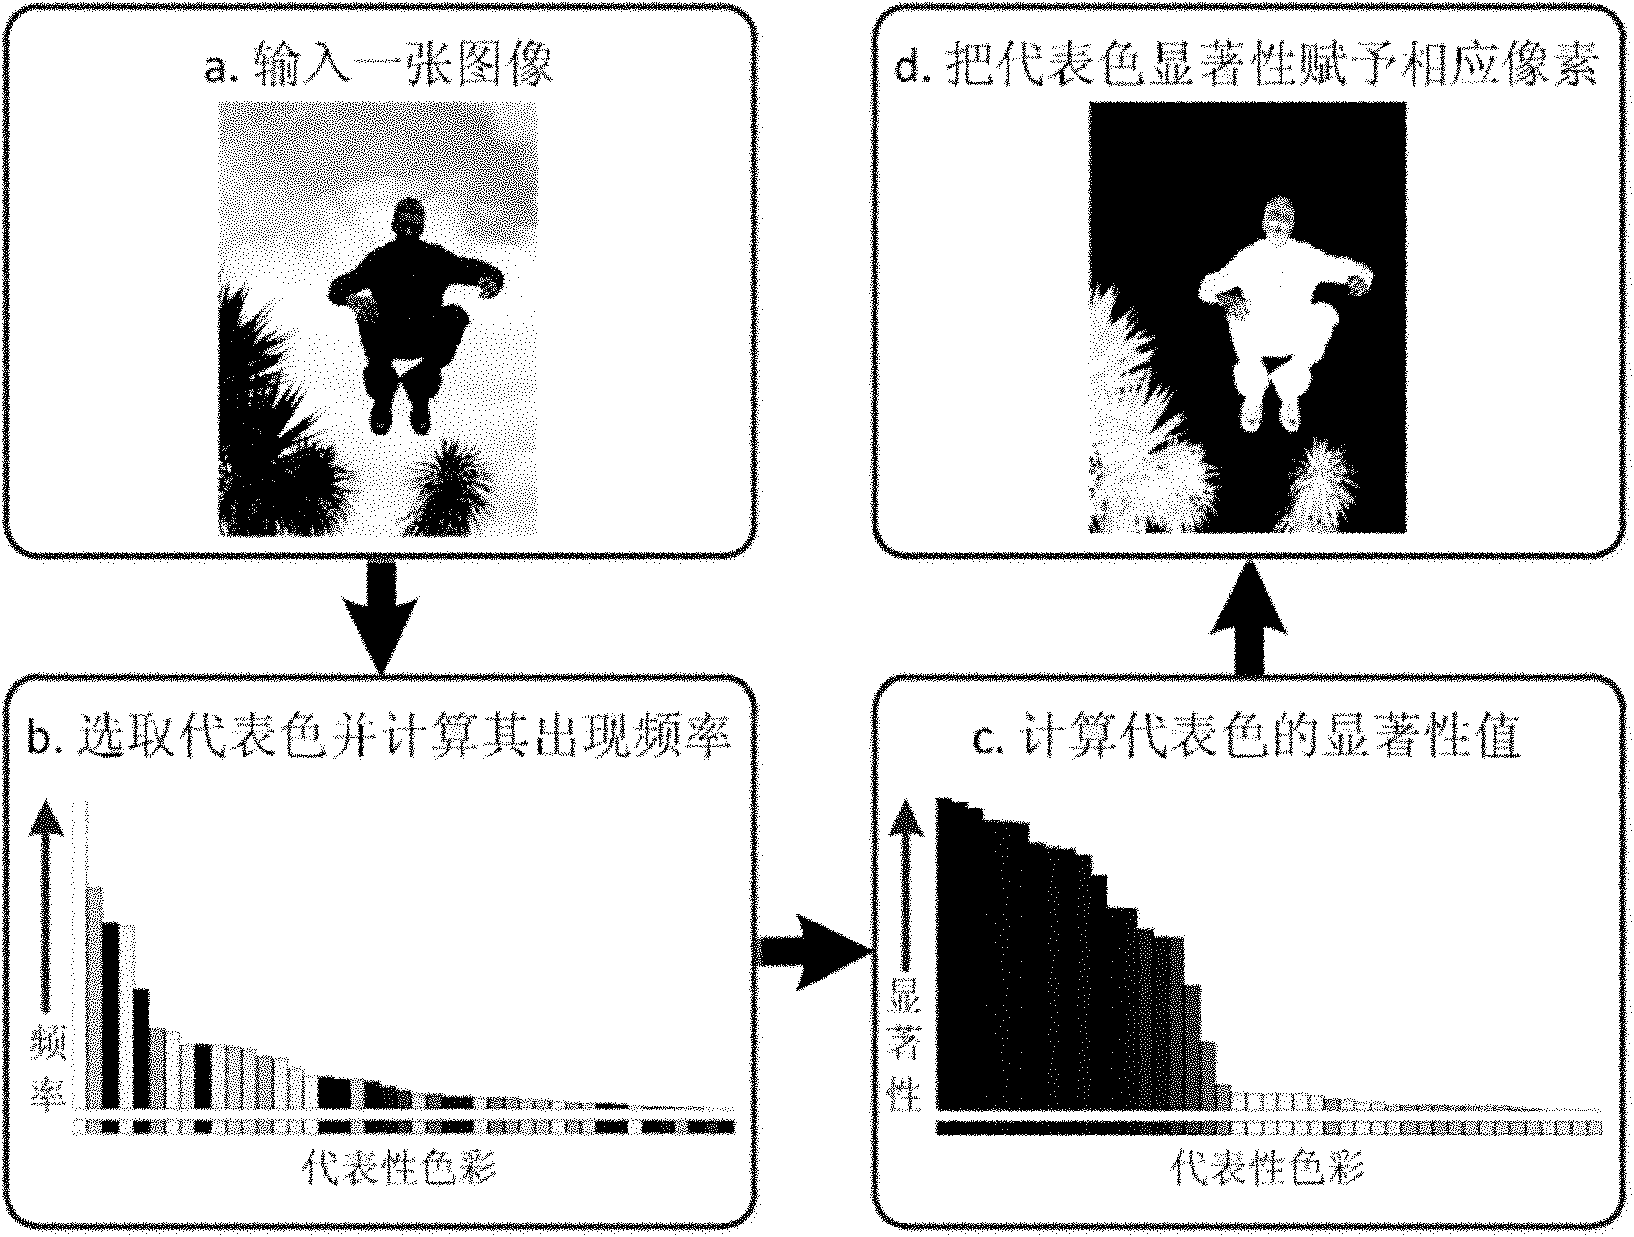 Image vision significance calculation method based on color histogram and global contrast